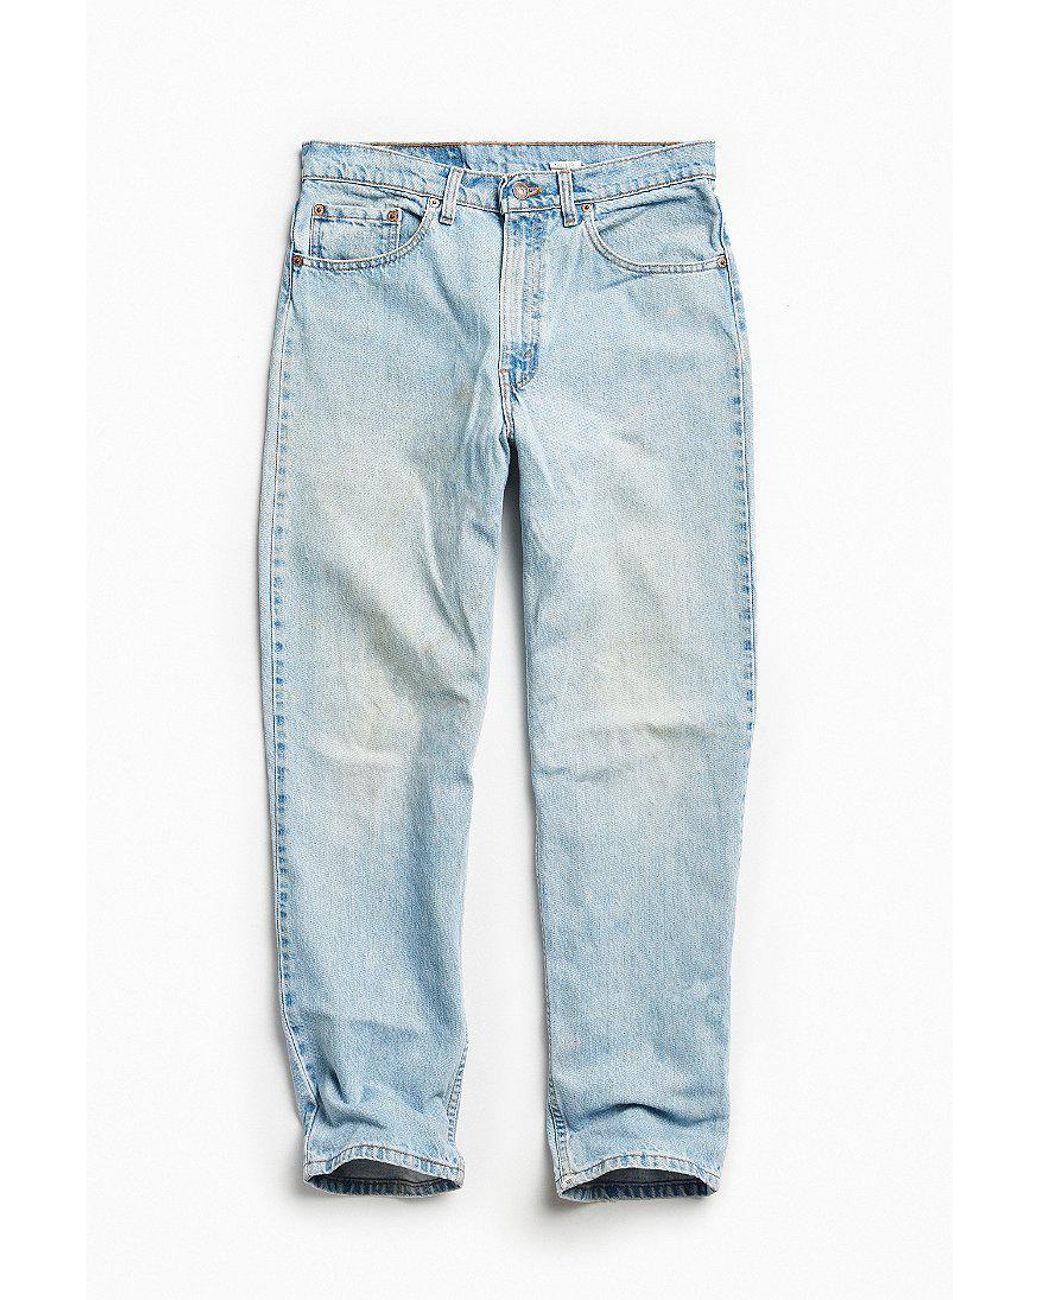 Urban Outfitters Vintage Levi's 550 Light Stonewash Relaxed Jean in ...